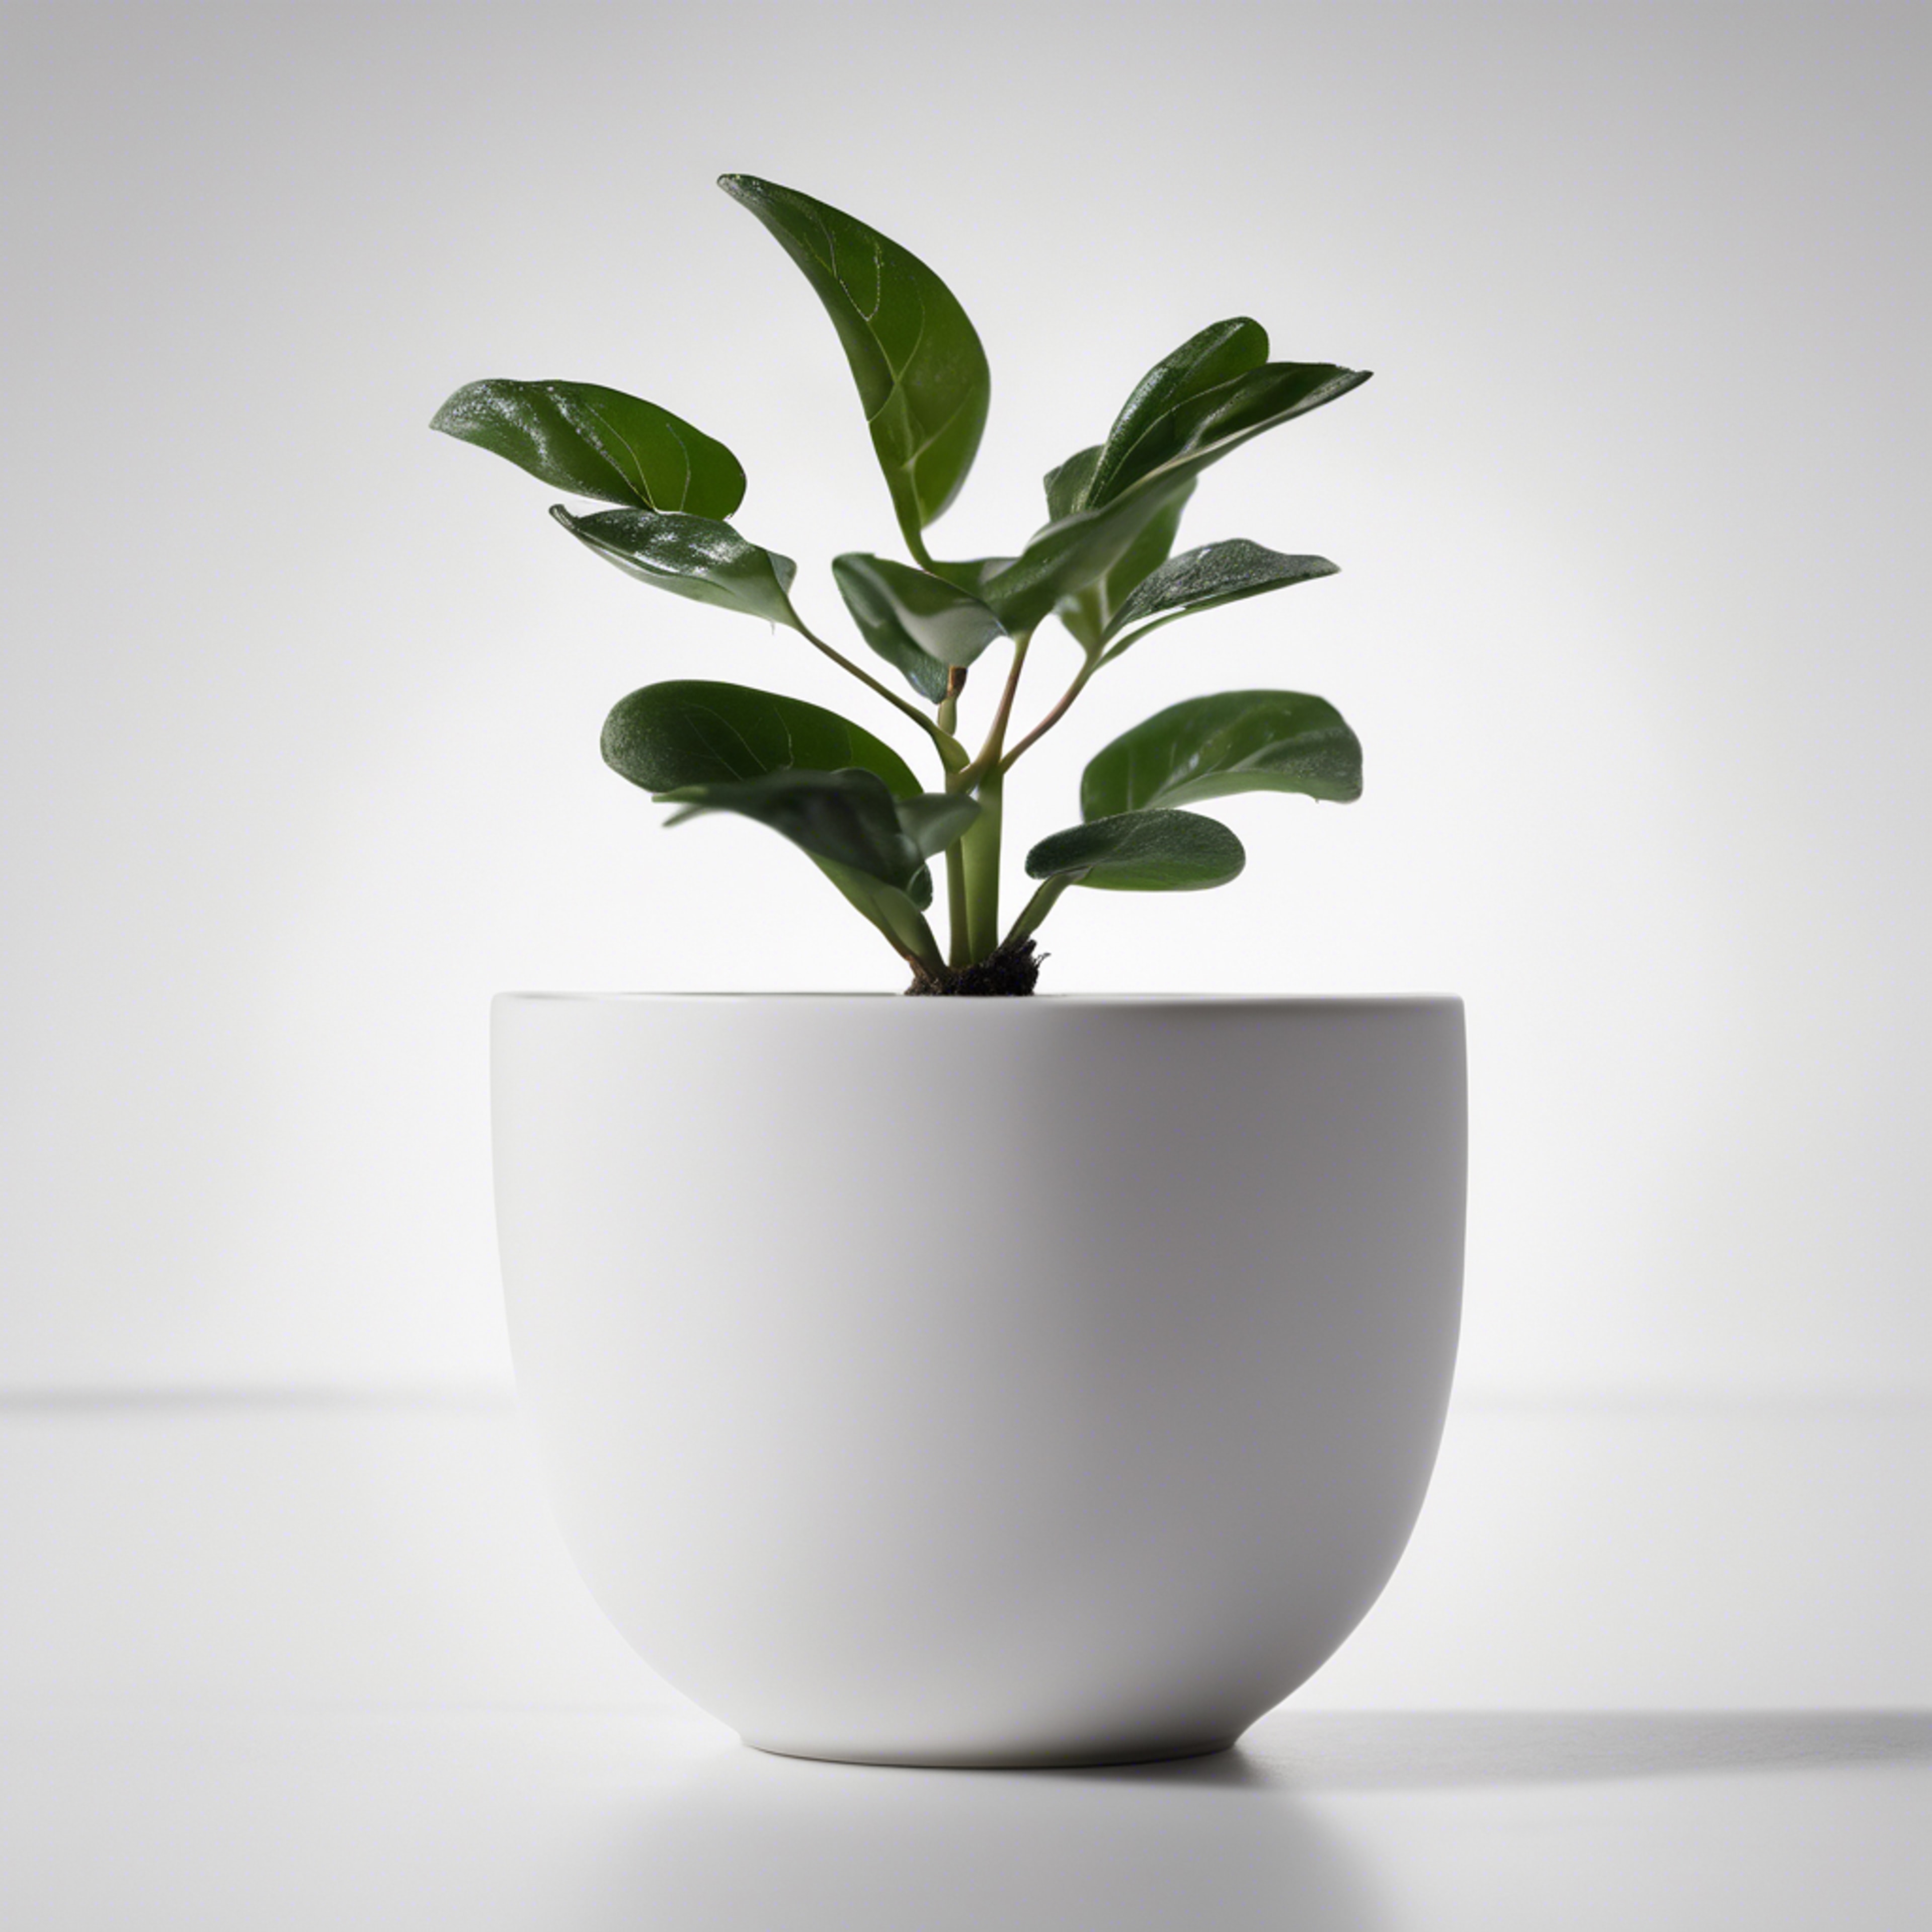 Small plant in a simple white ceramic pot against a minimalist white backdrop.壁紙[a9b2ed4c340742d2b1fd]